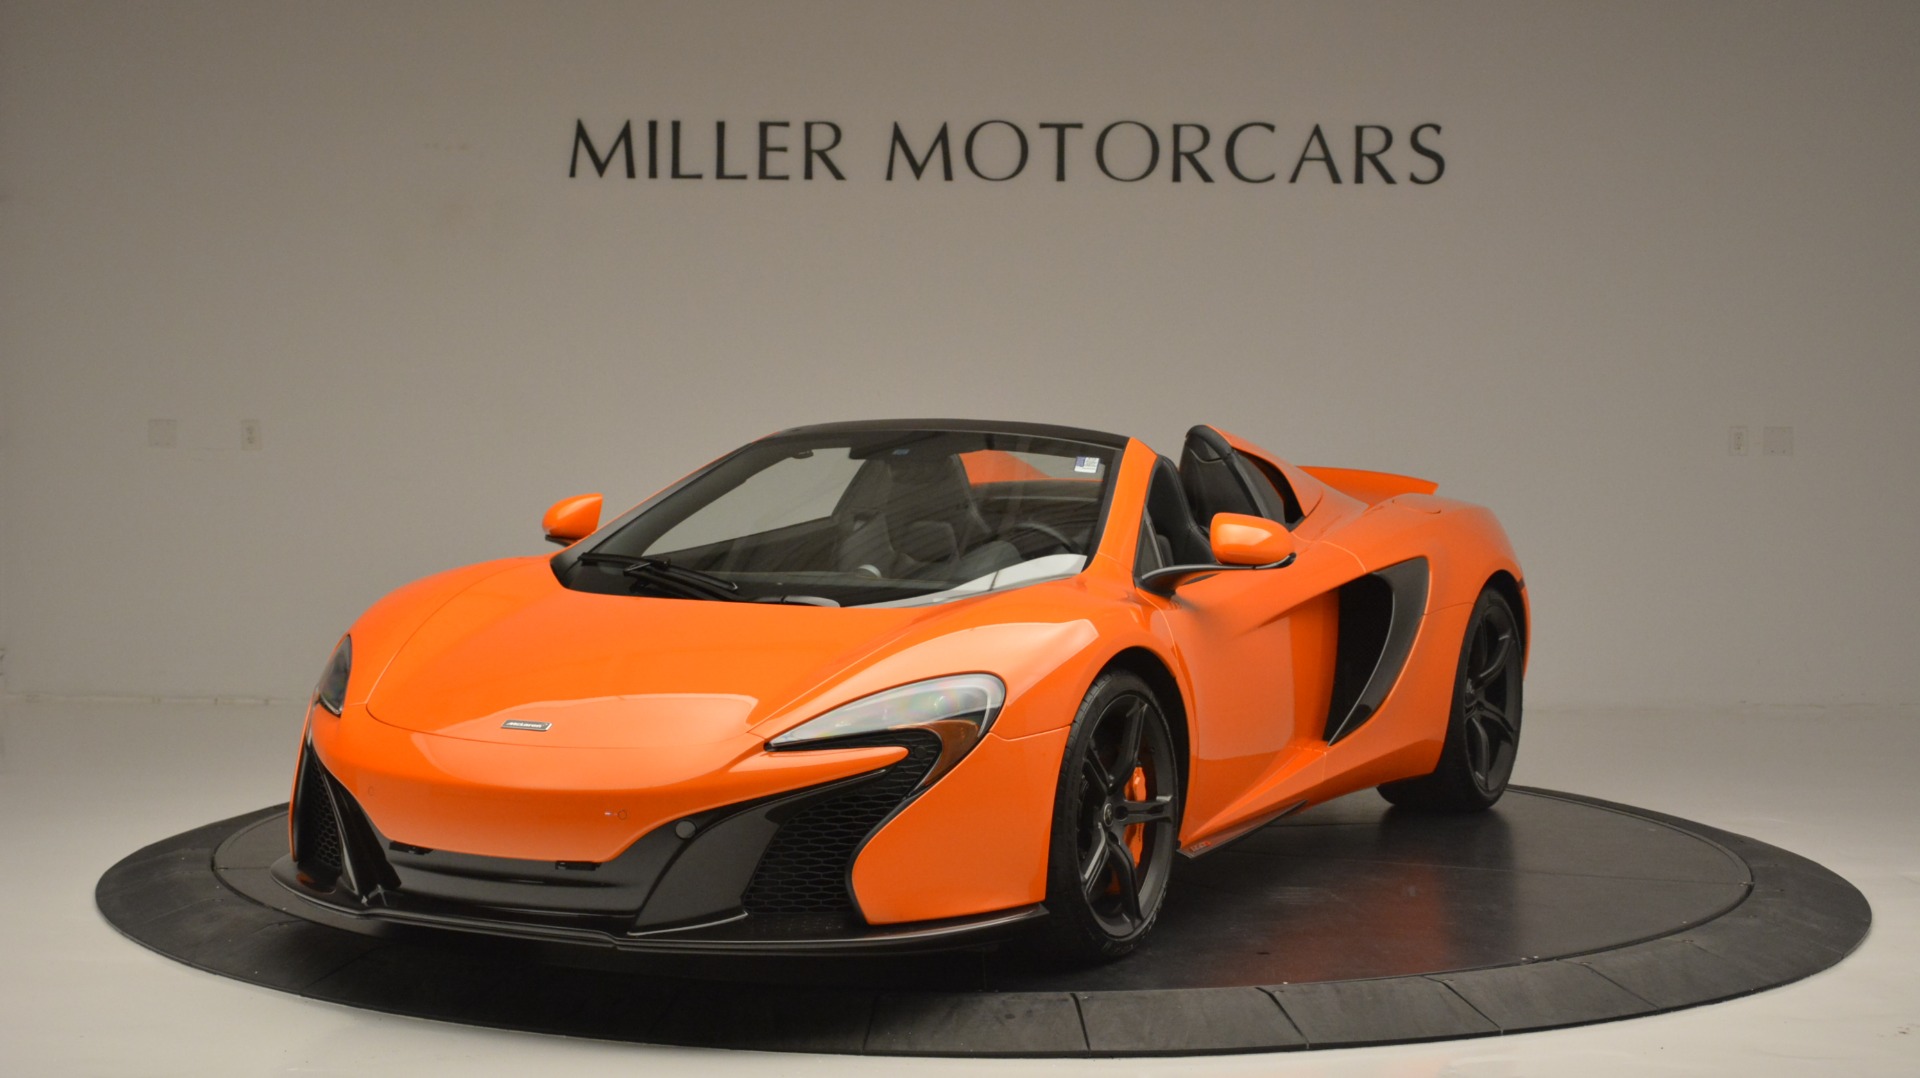 Used 2015 McLaren 650S Spider Convertible for sale Sold at Aston Martin of Greenwich in Greenwich CT 06830 1